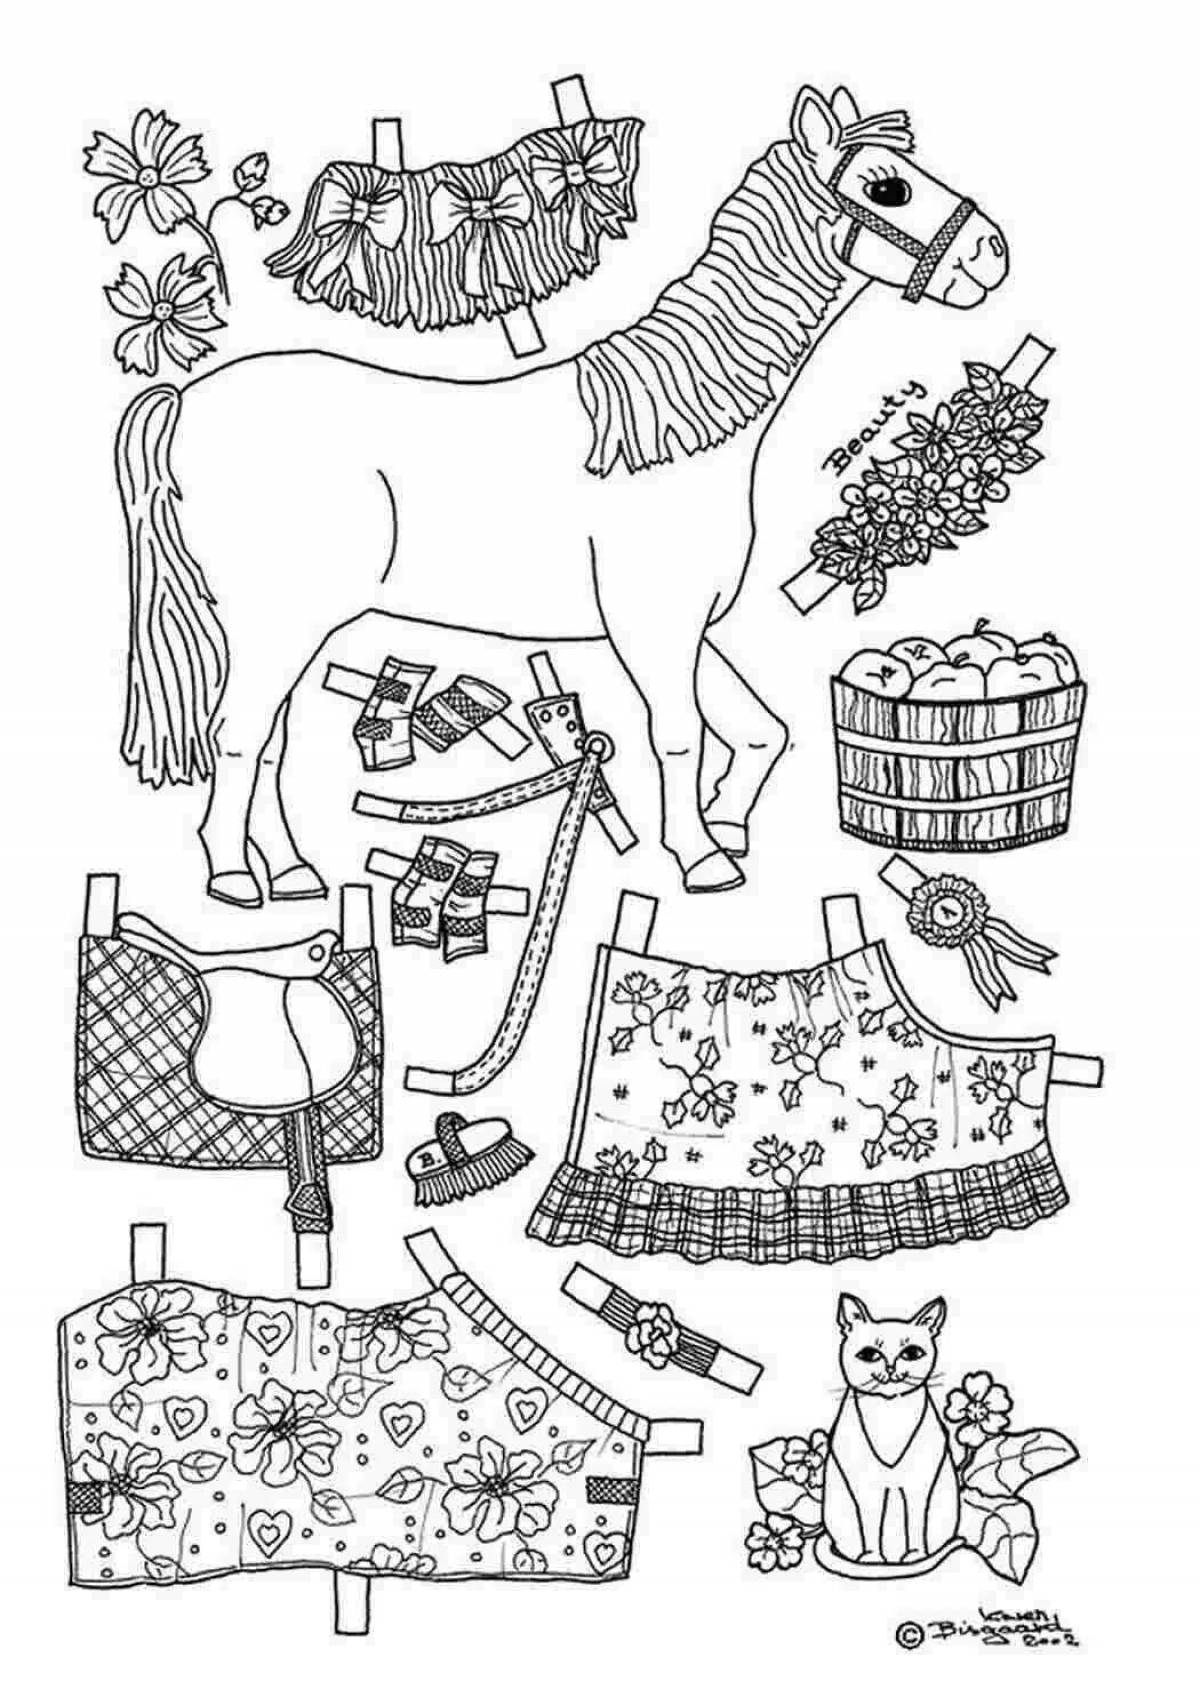 Charming coloring book dog with clothes